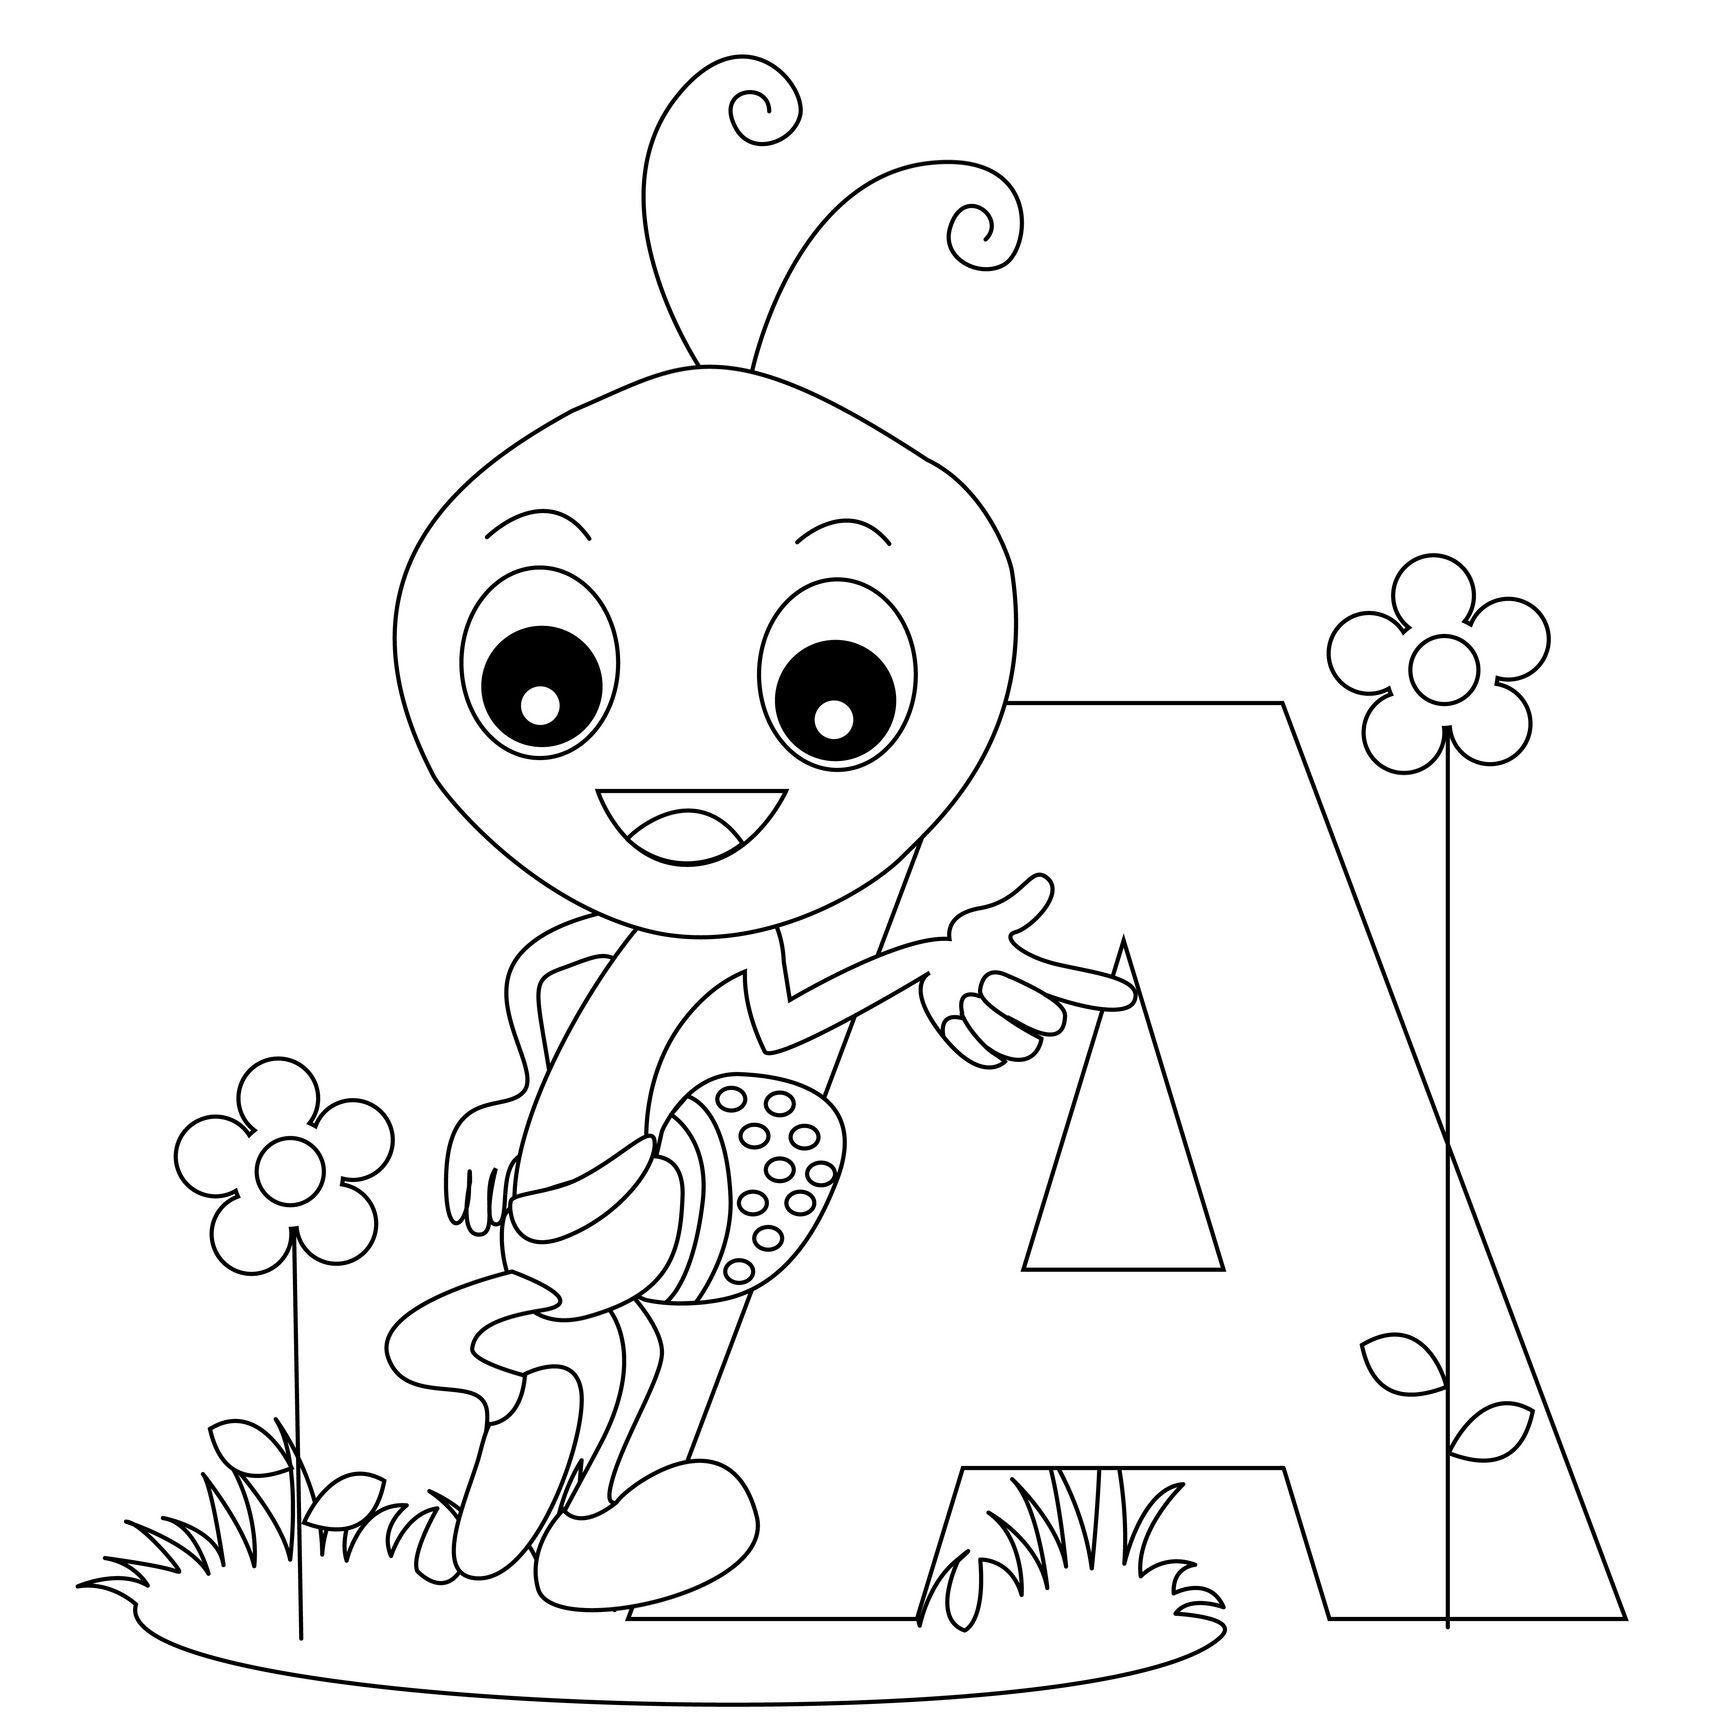 free printable abc coloring pages a is for ant - VoteForVerde.com